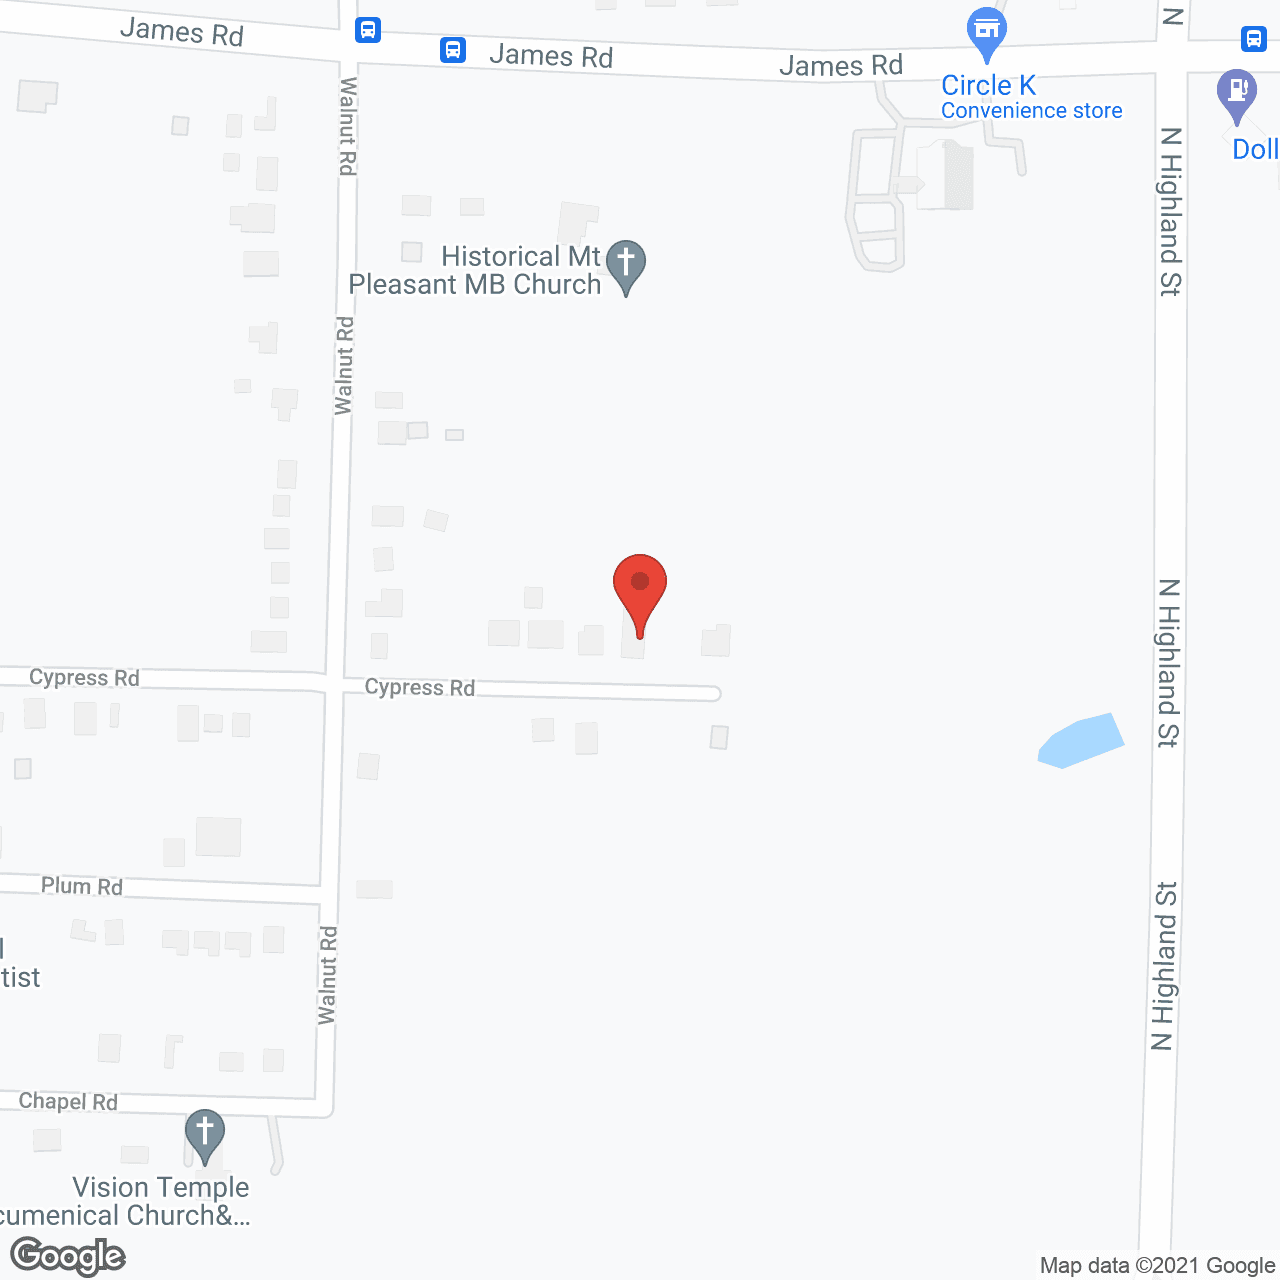 Bond Care Home in google map